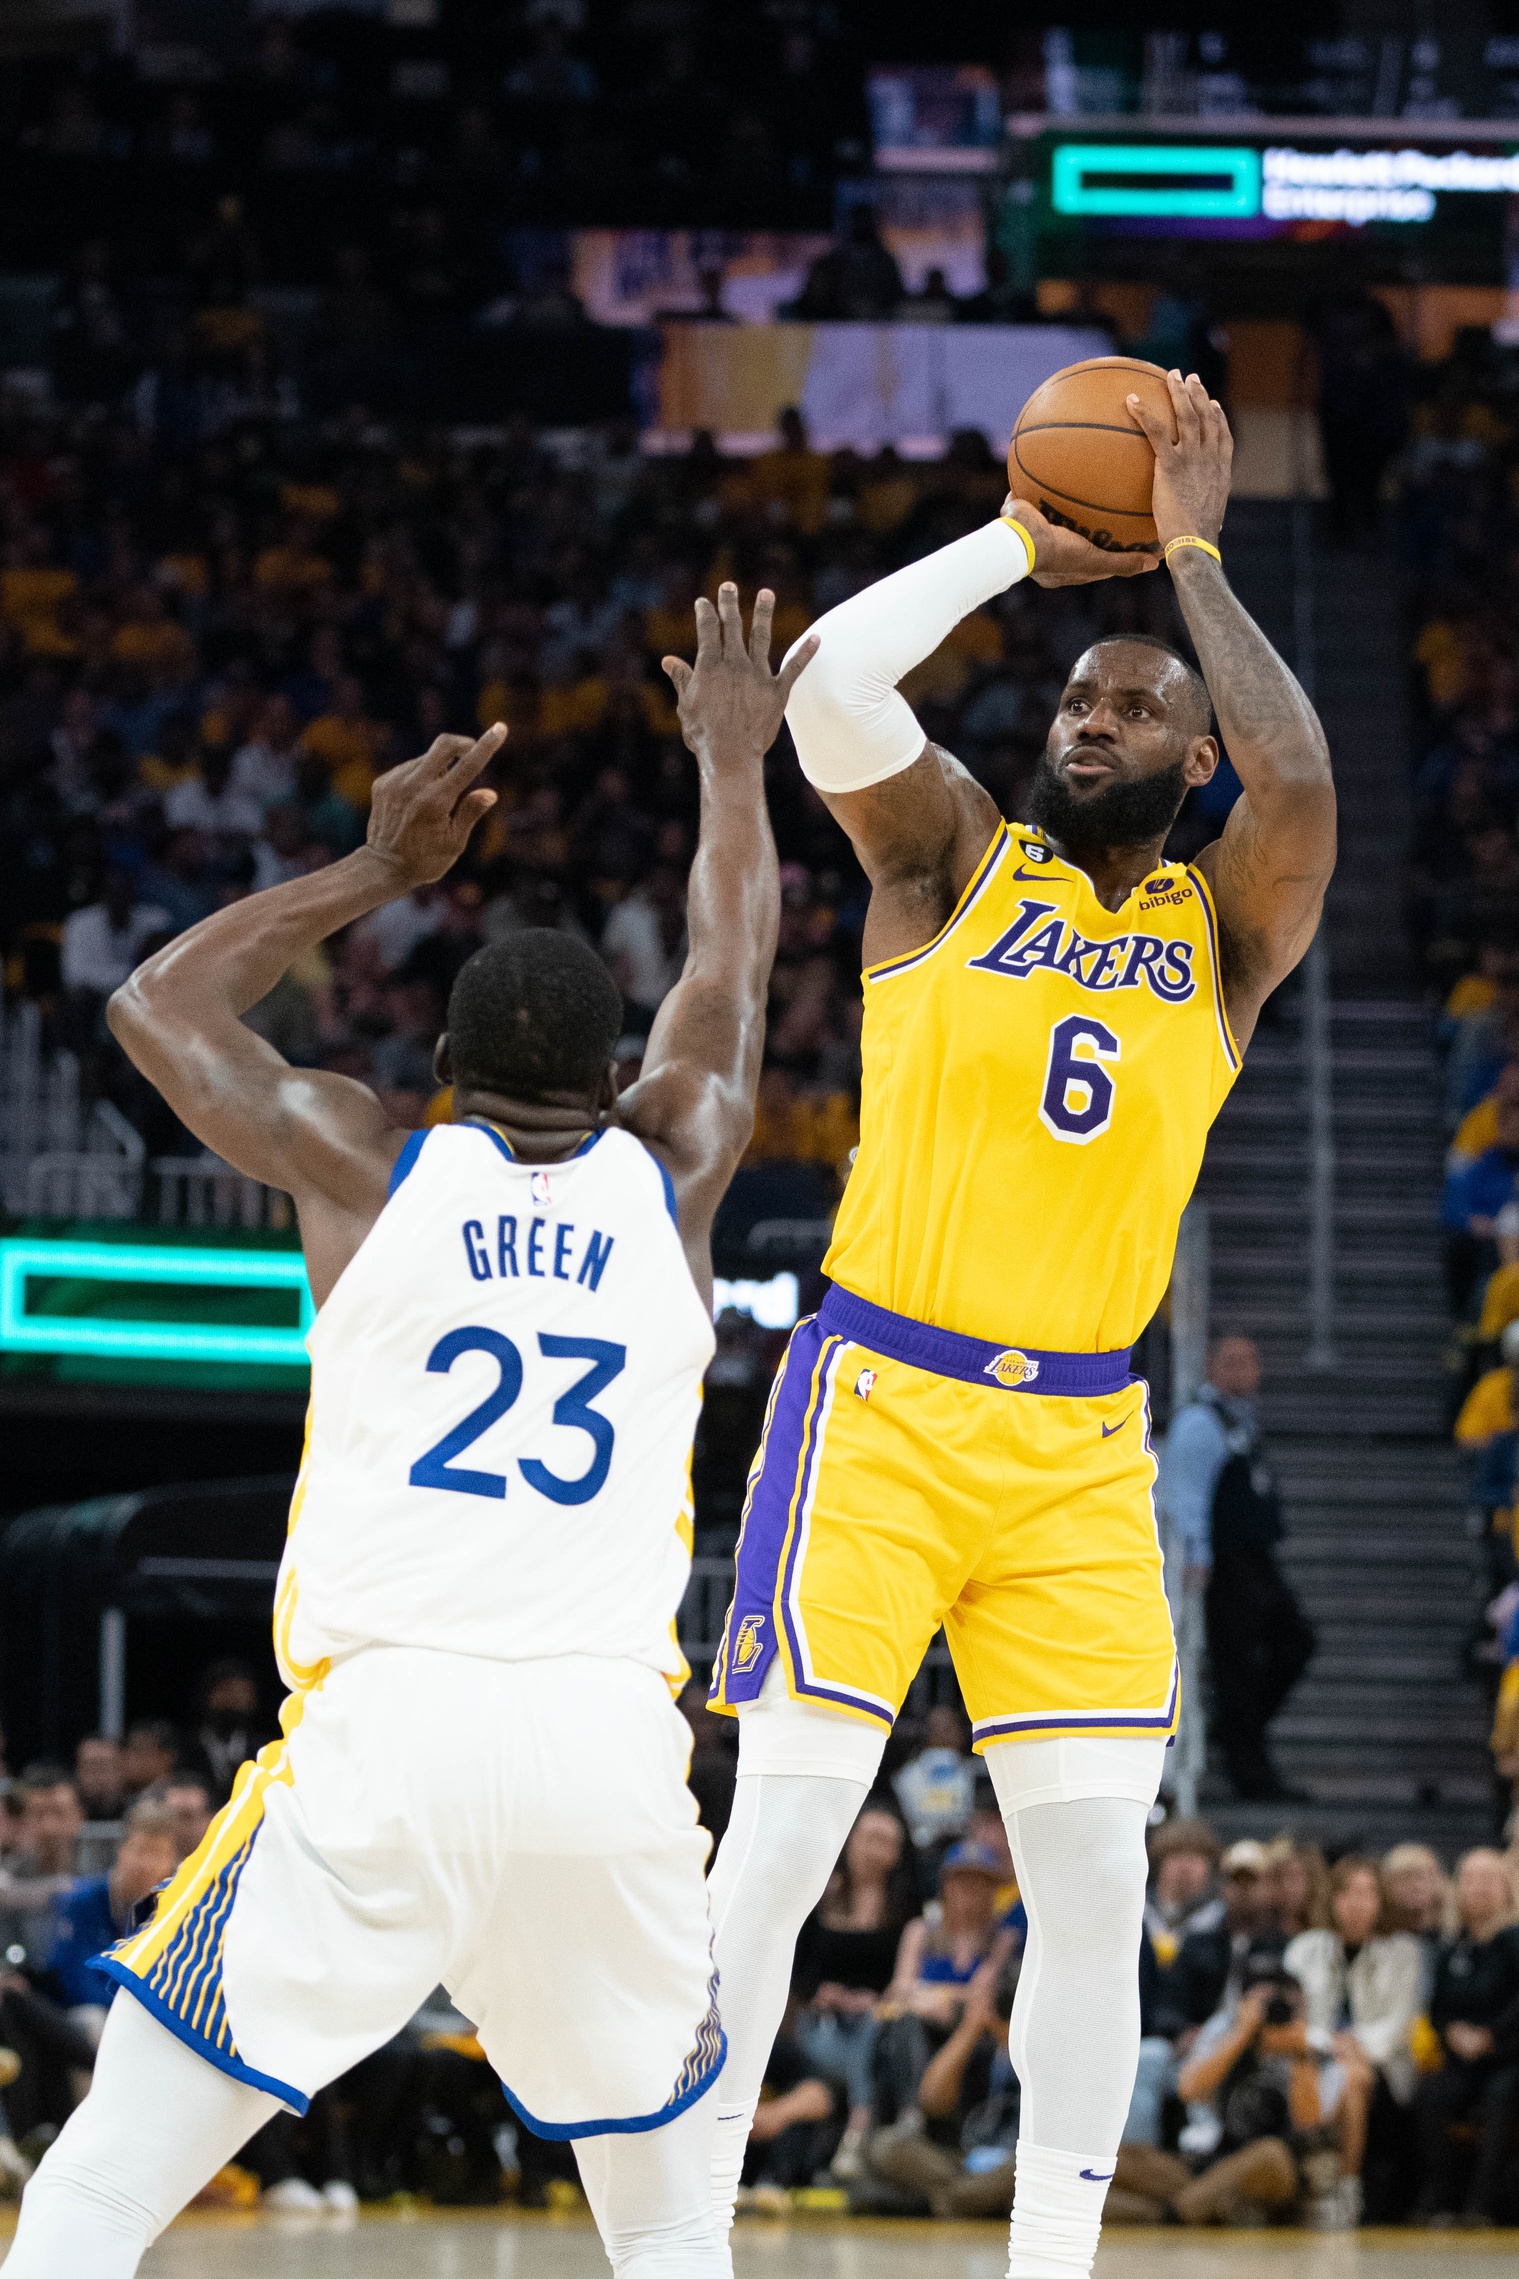 Warriors' Draymond Green expected to decline player option